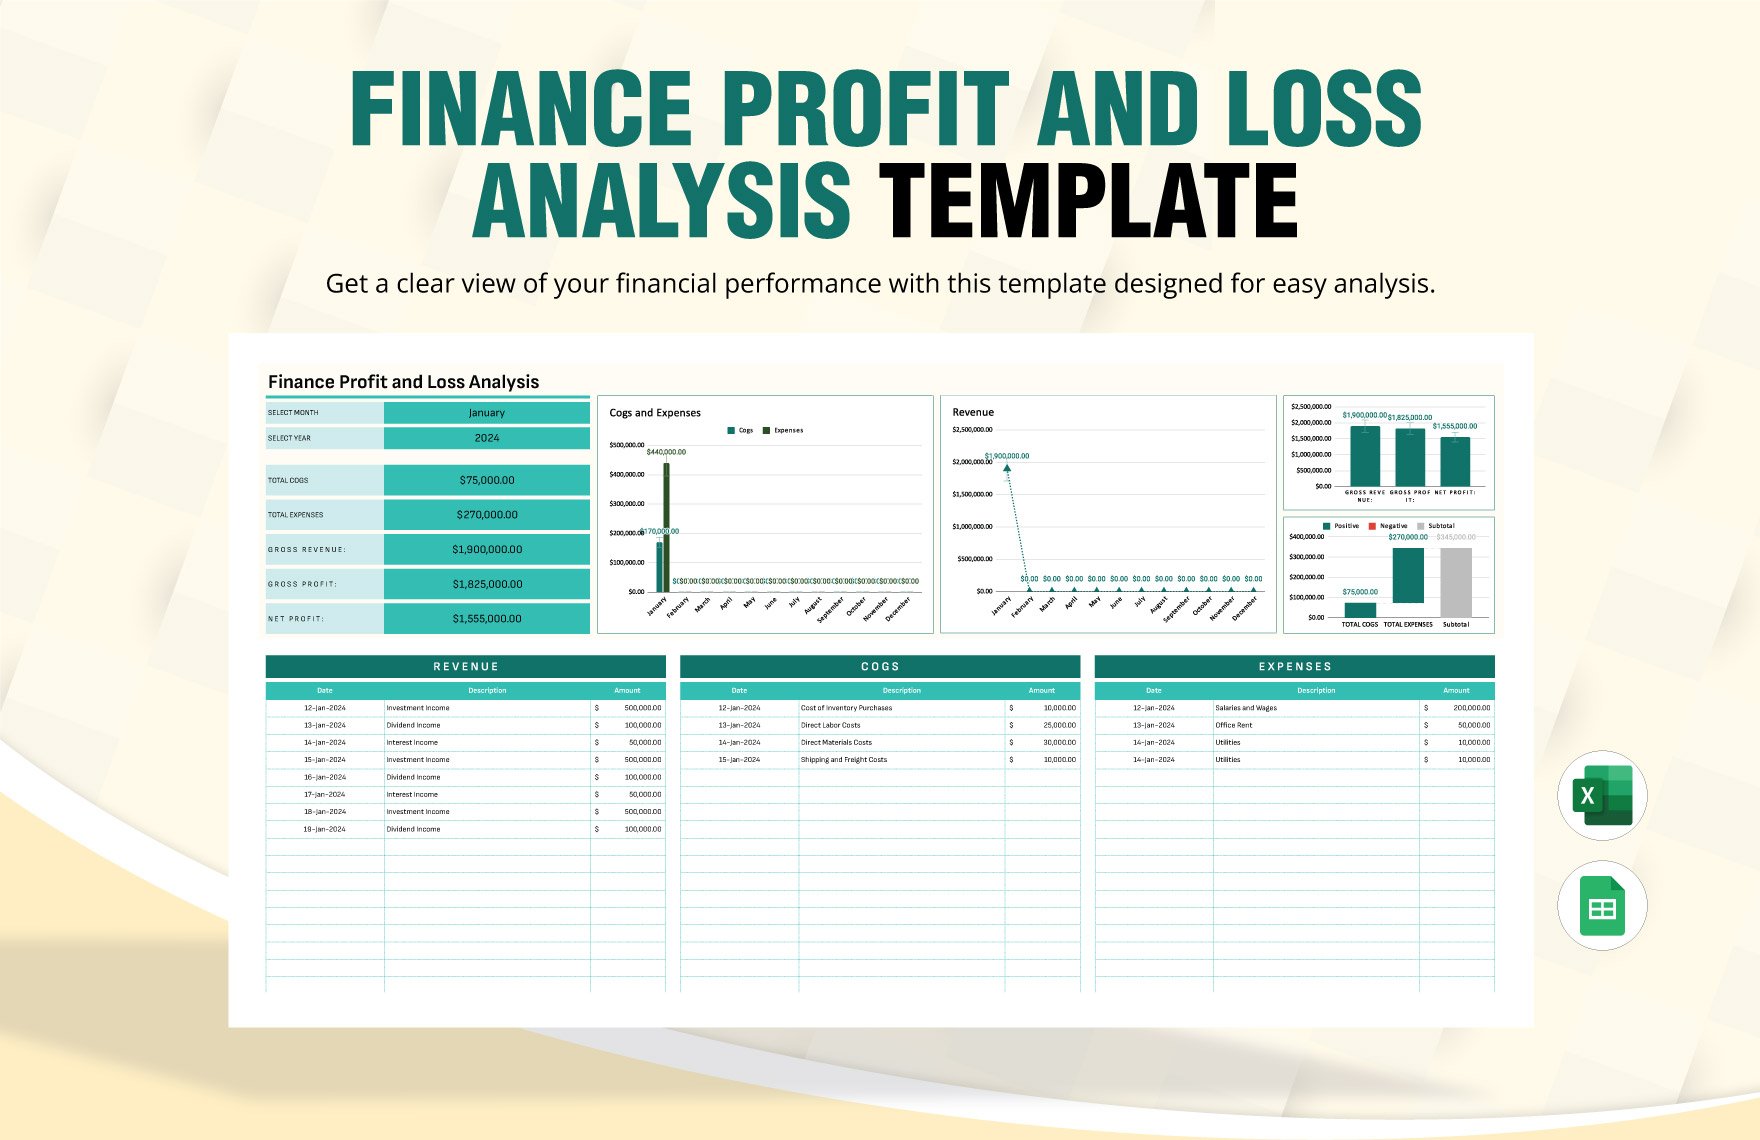 Finance Profit and Loss Analysis Template in Excel, Google Sheets